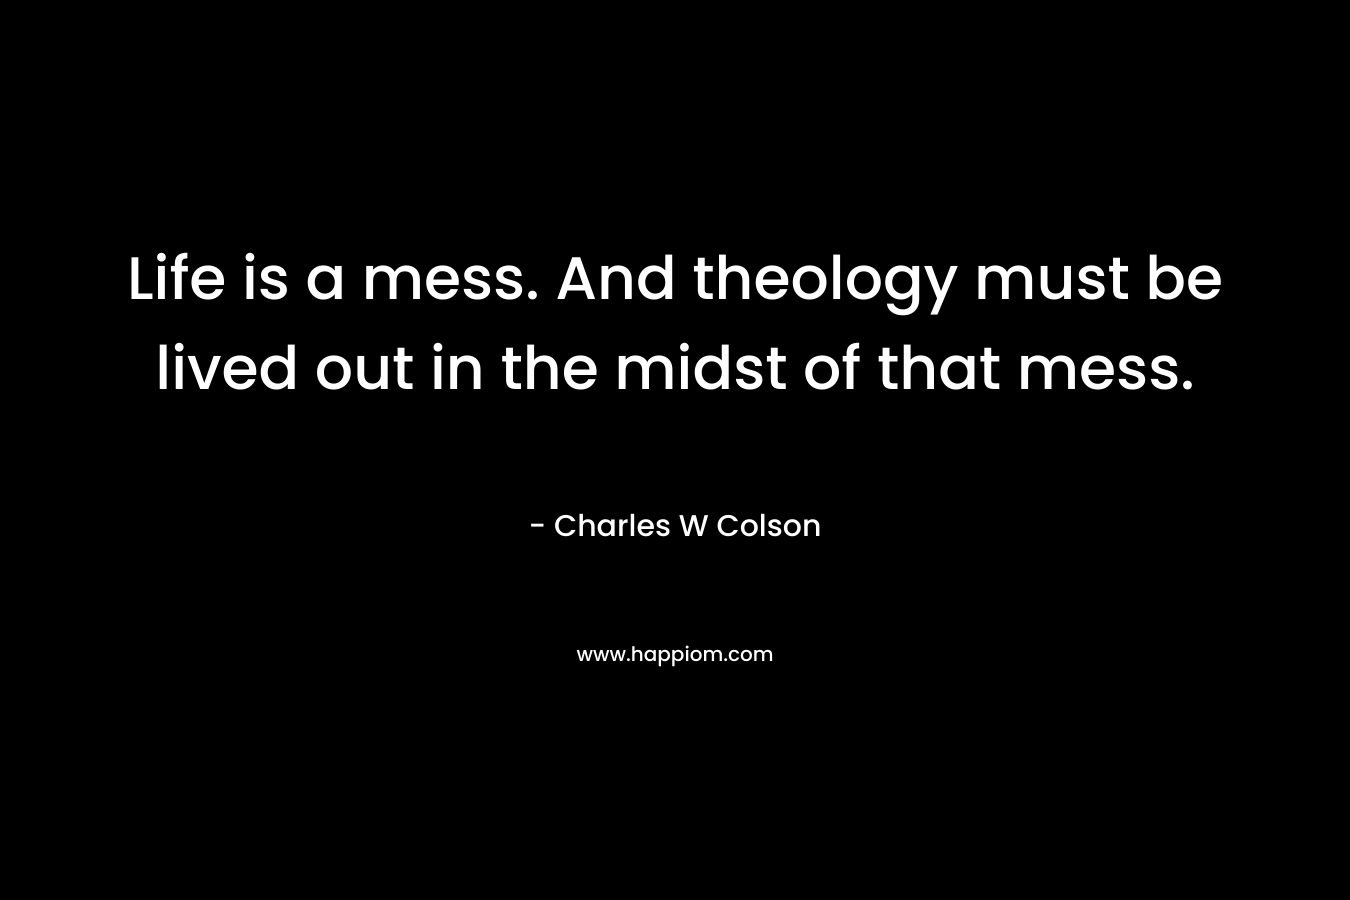 Life is a mess. And theology must be lived out in the midst of that mess. – Charles W Colson